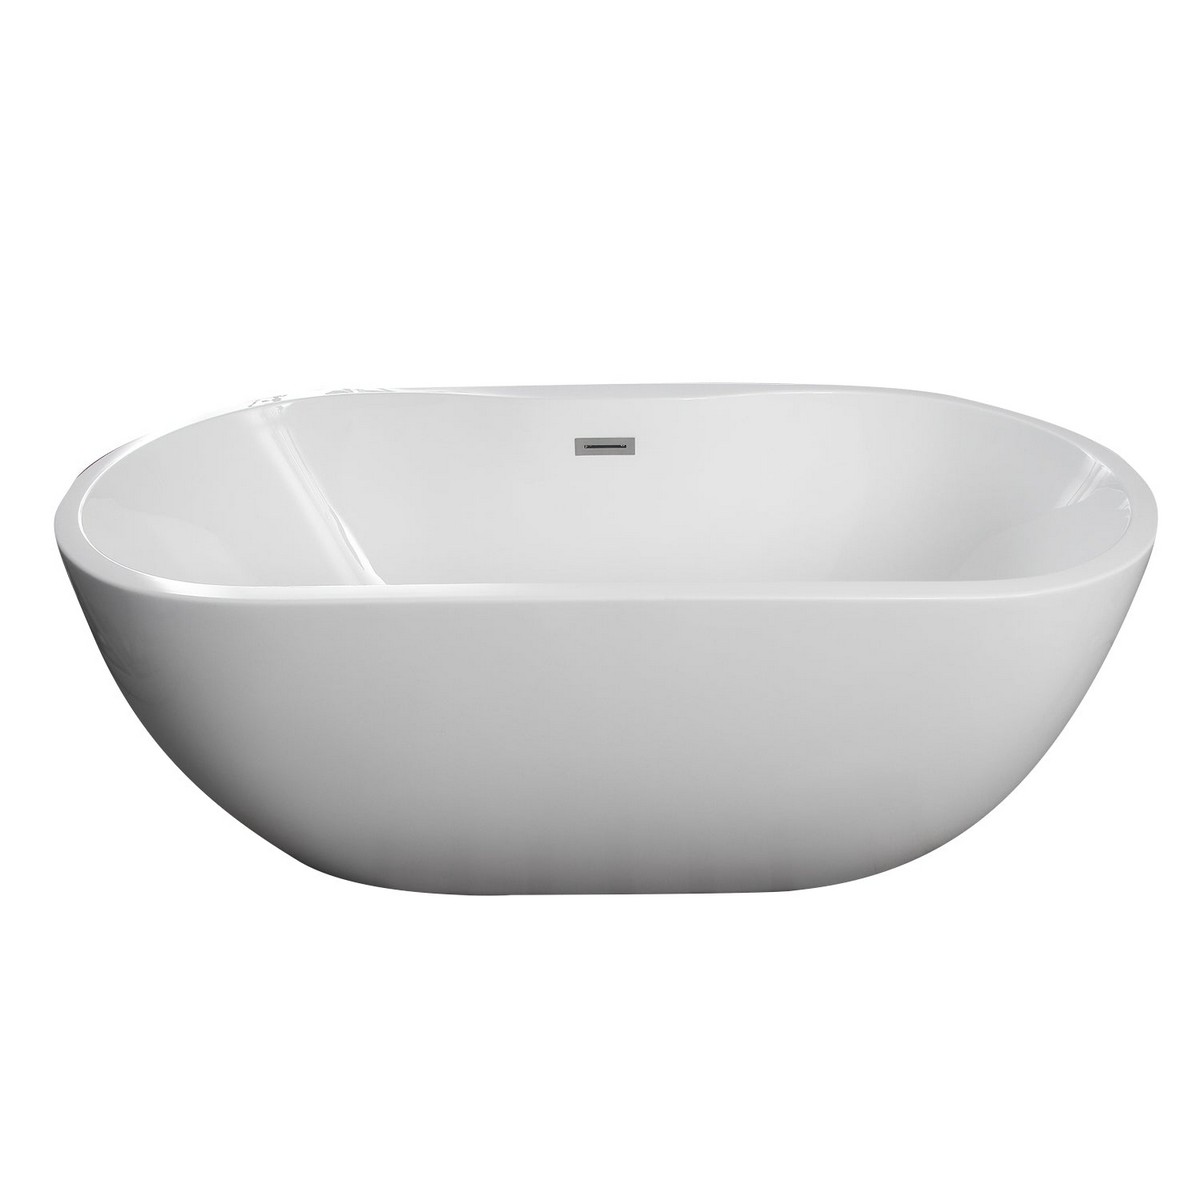 BARCLAY ATOV7H56BIG PAN 55 1/2 INCH ACRYLIC FREESTANDING OVAL SOAKING BATHTUB IN WHITE WITH INTEGRAL DRAIN AND OVERFLOW AND 7 INCH RIM HOLES